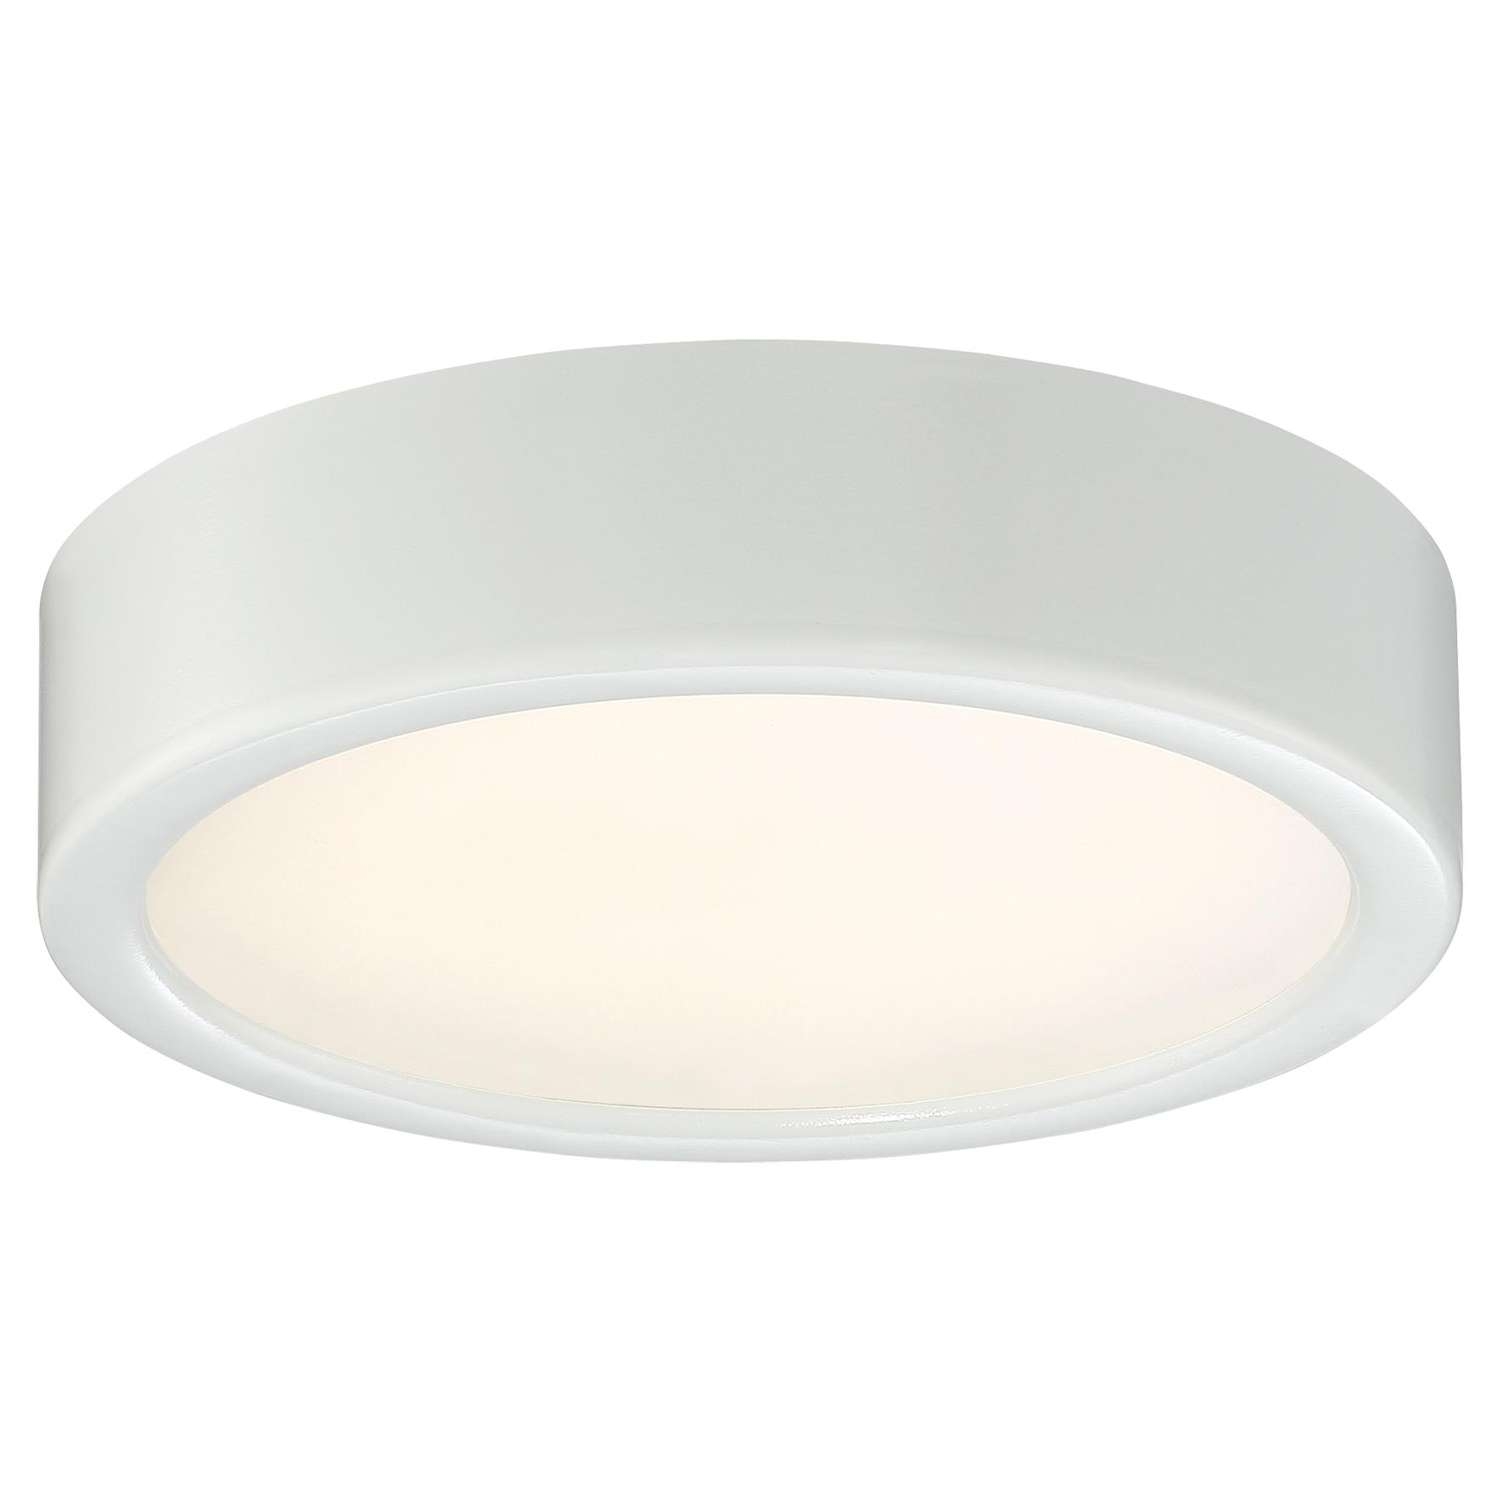 Permalink to George Kovacs Flush Mount Ceiling Lights